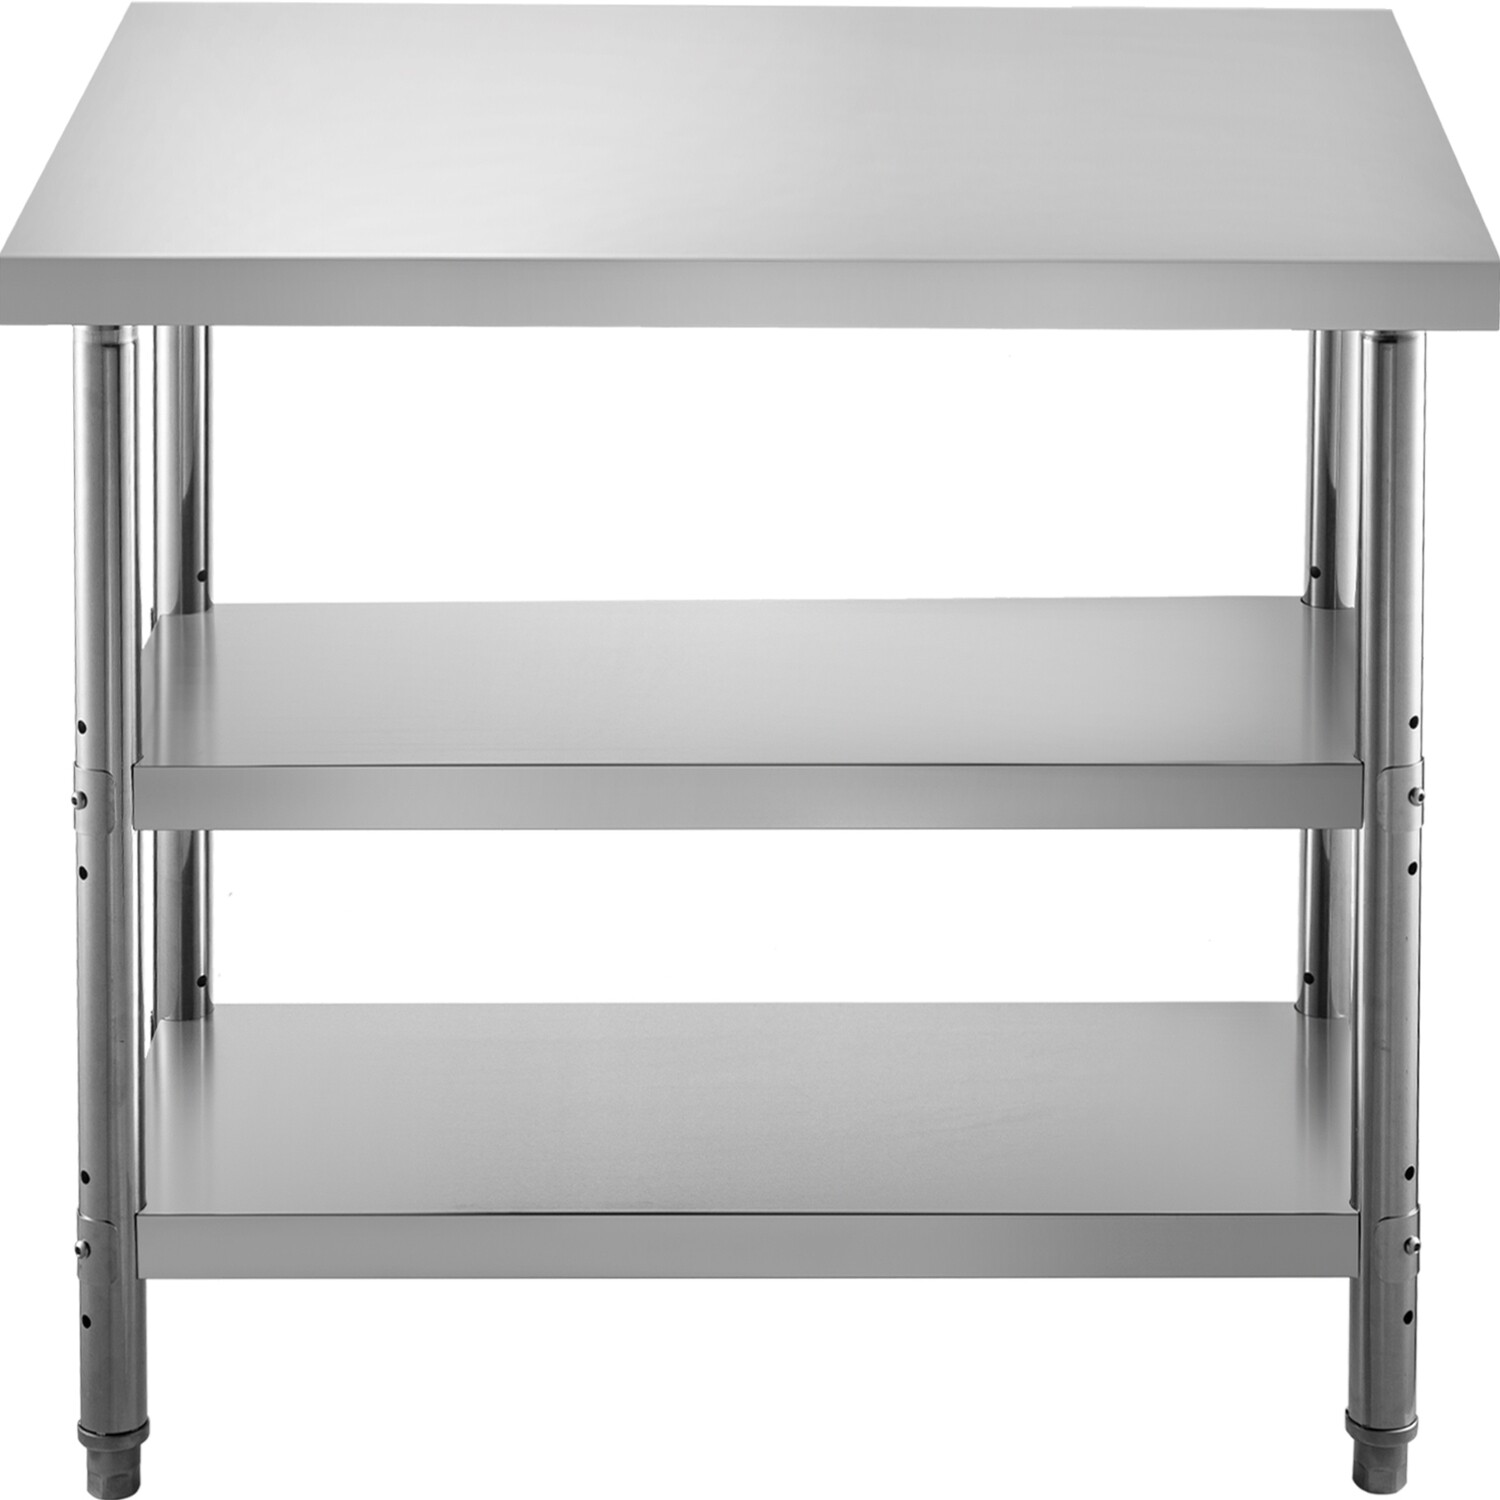 Commercial stainless steel table, 60x14x33 inches, outdoor food prep table